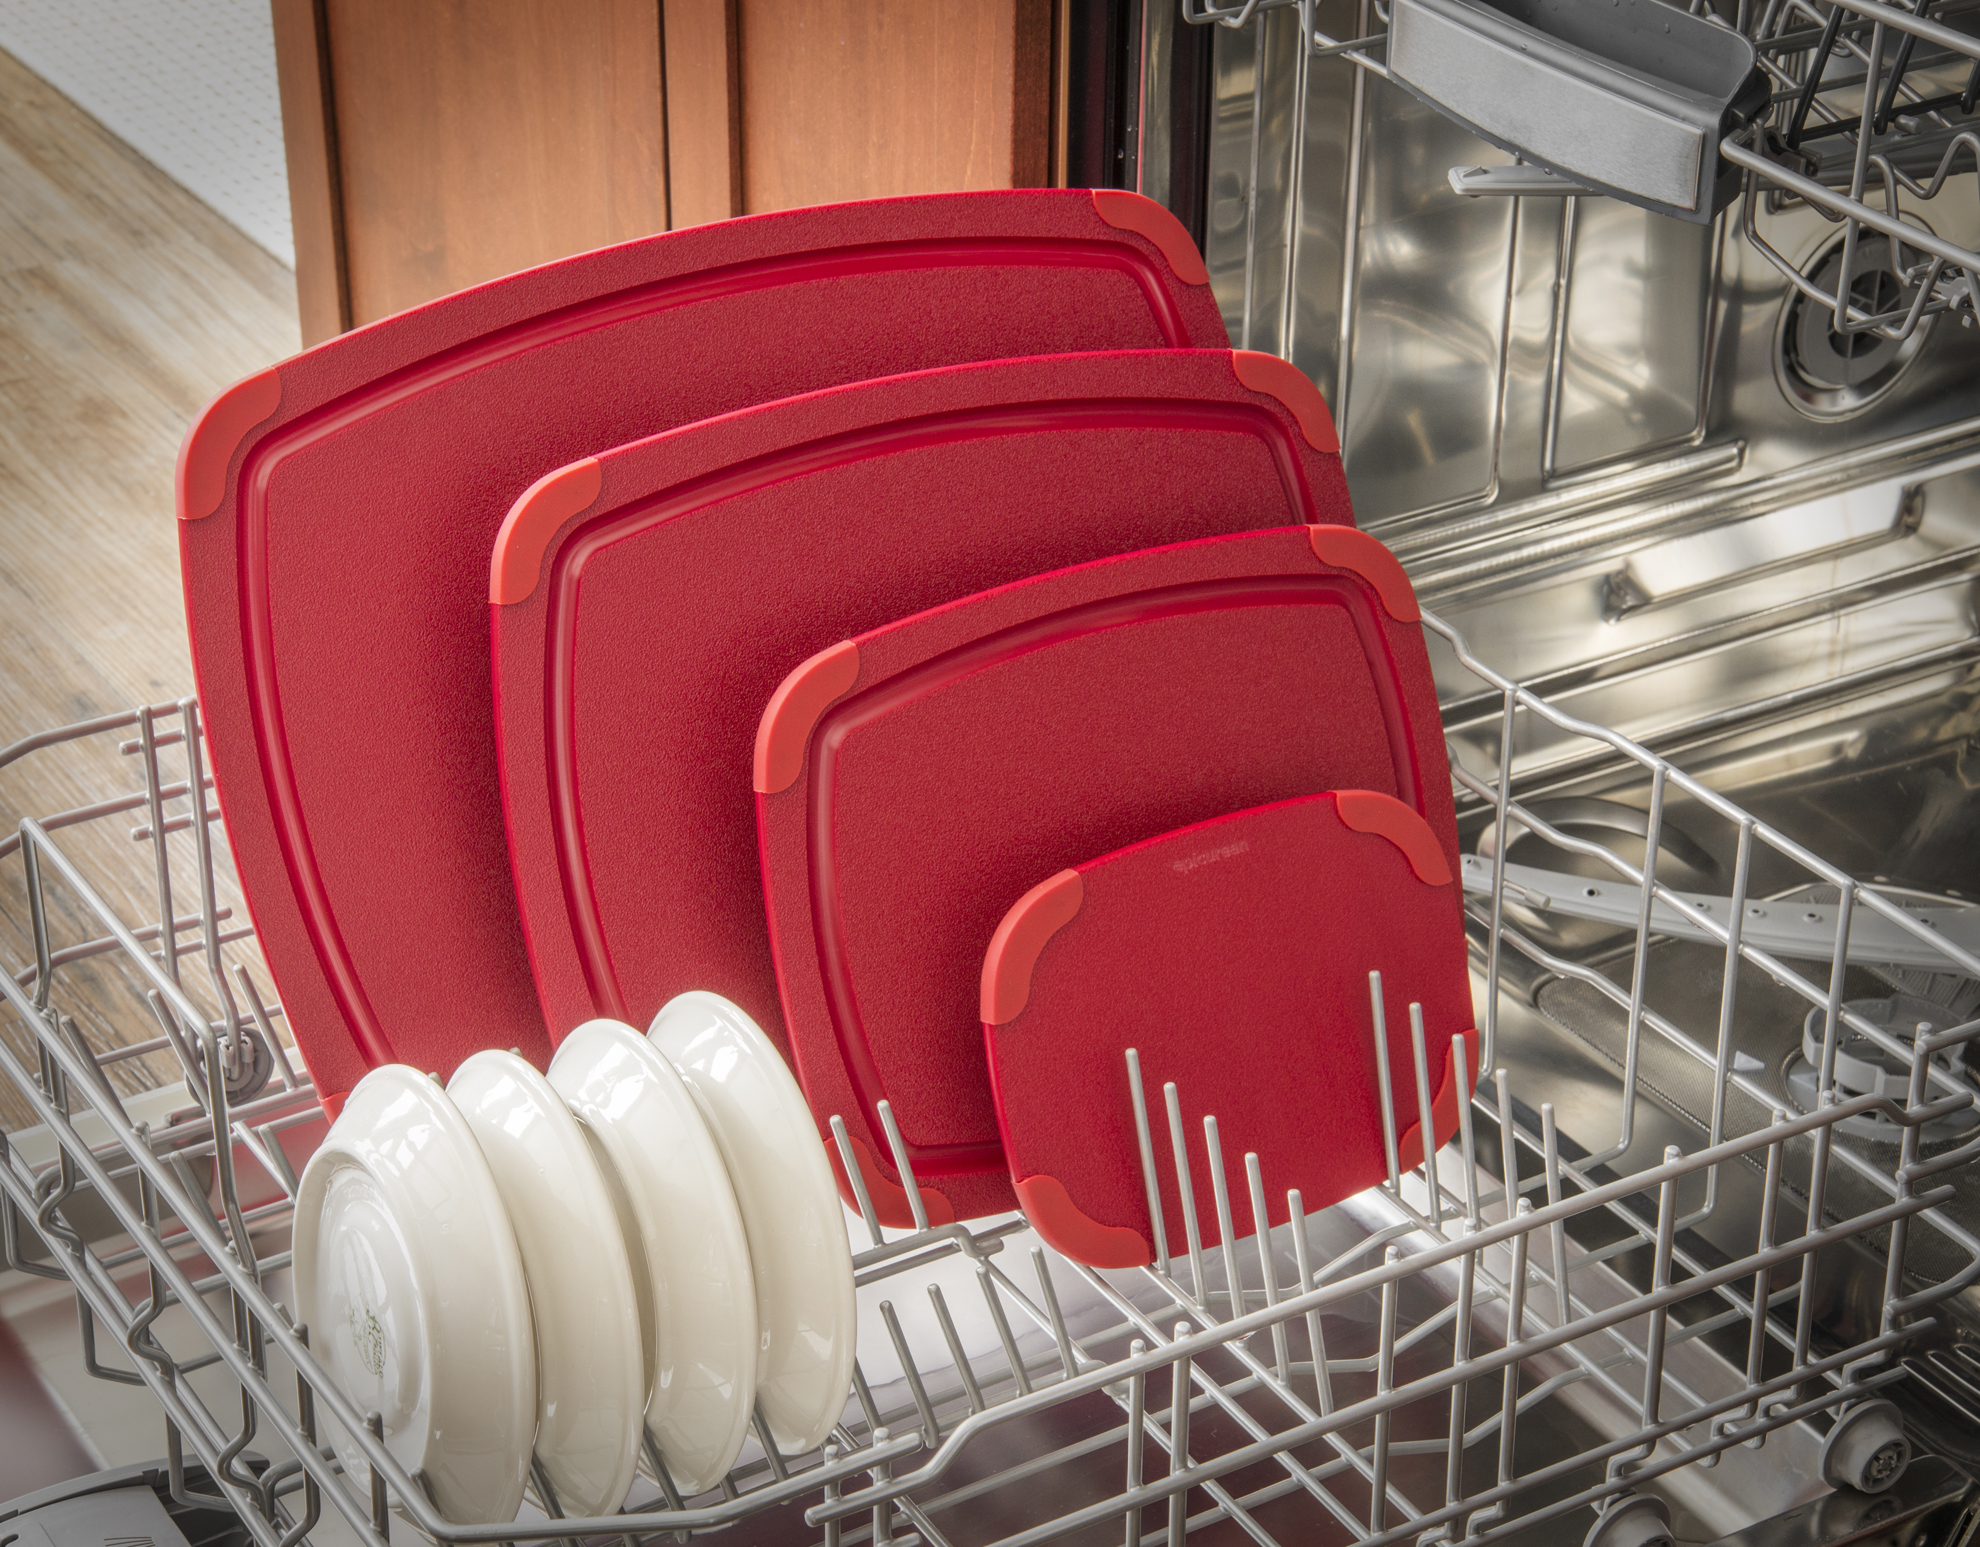 image5_-cutting board poly series-red dishwasher